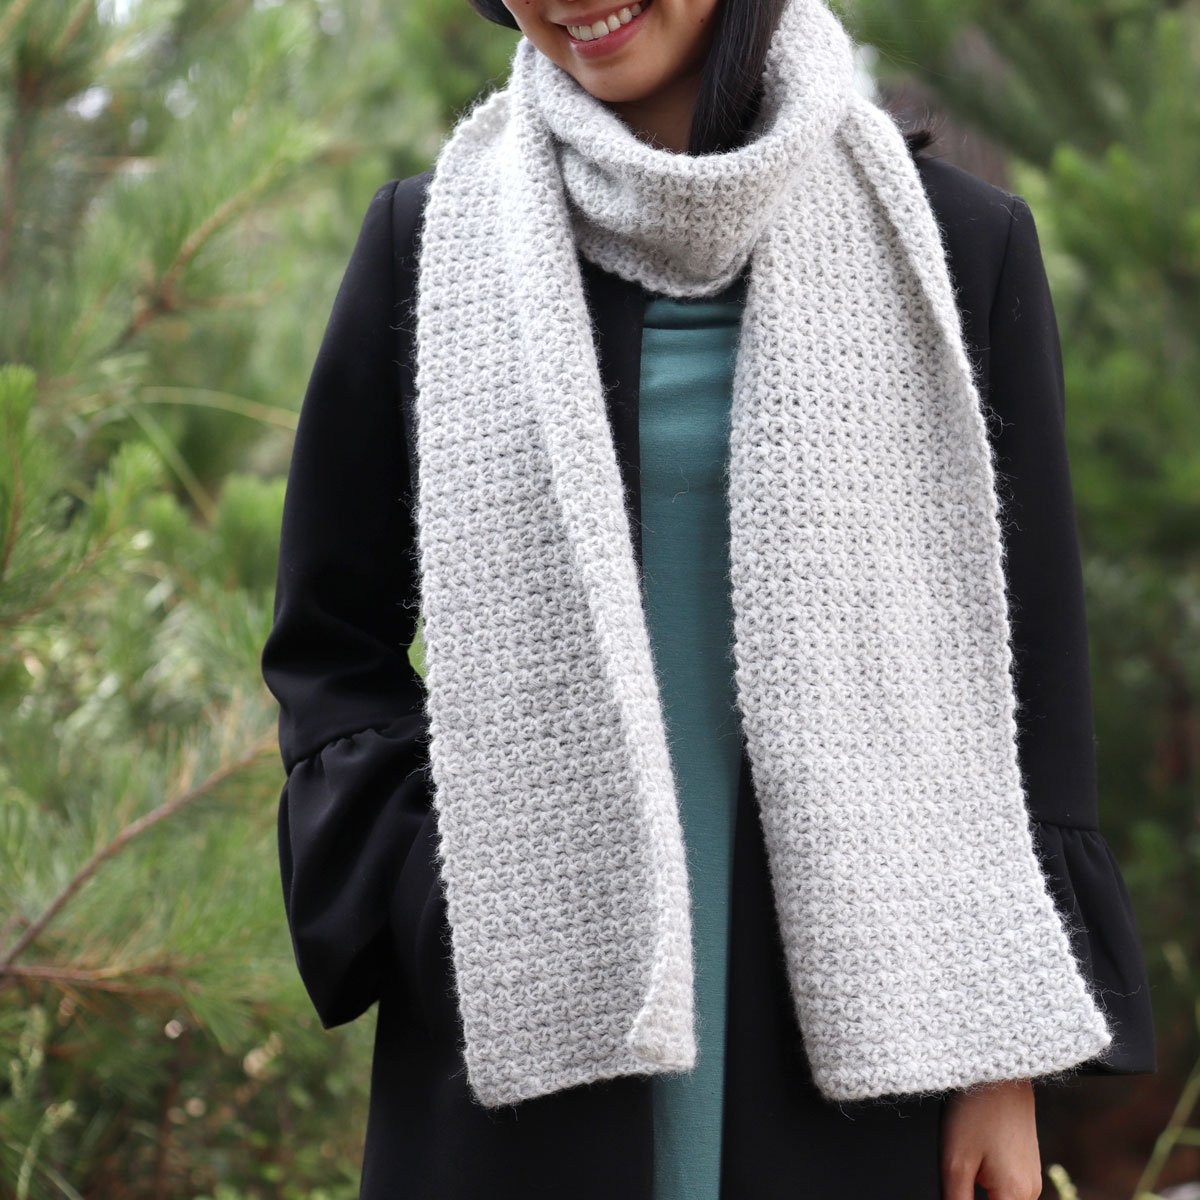 Beginner Crochet Scarf – In The Clouds Scarf - free pattern + video